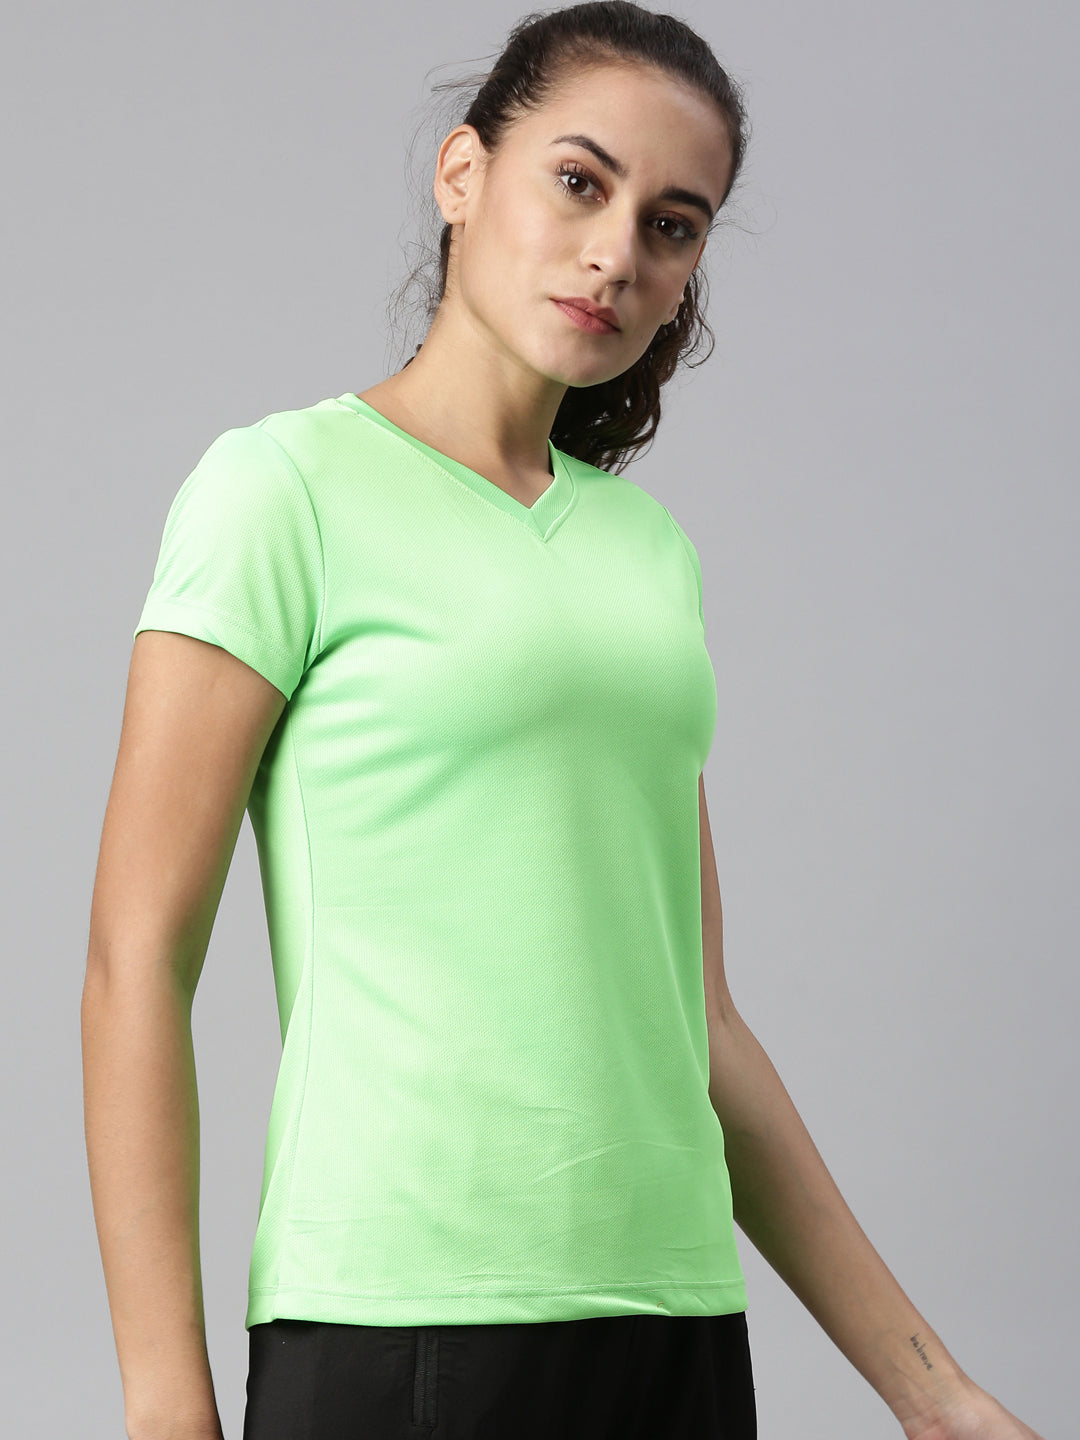 JESSIE  (100% MICRO POLYESTER SPORTSWARE T-SHIRT FOR WOMENS)